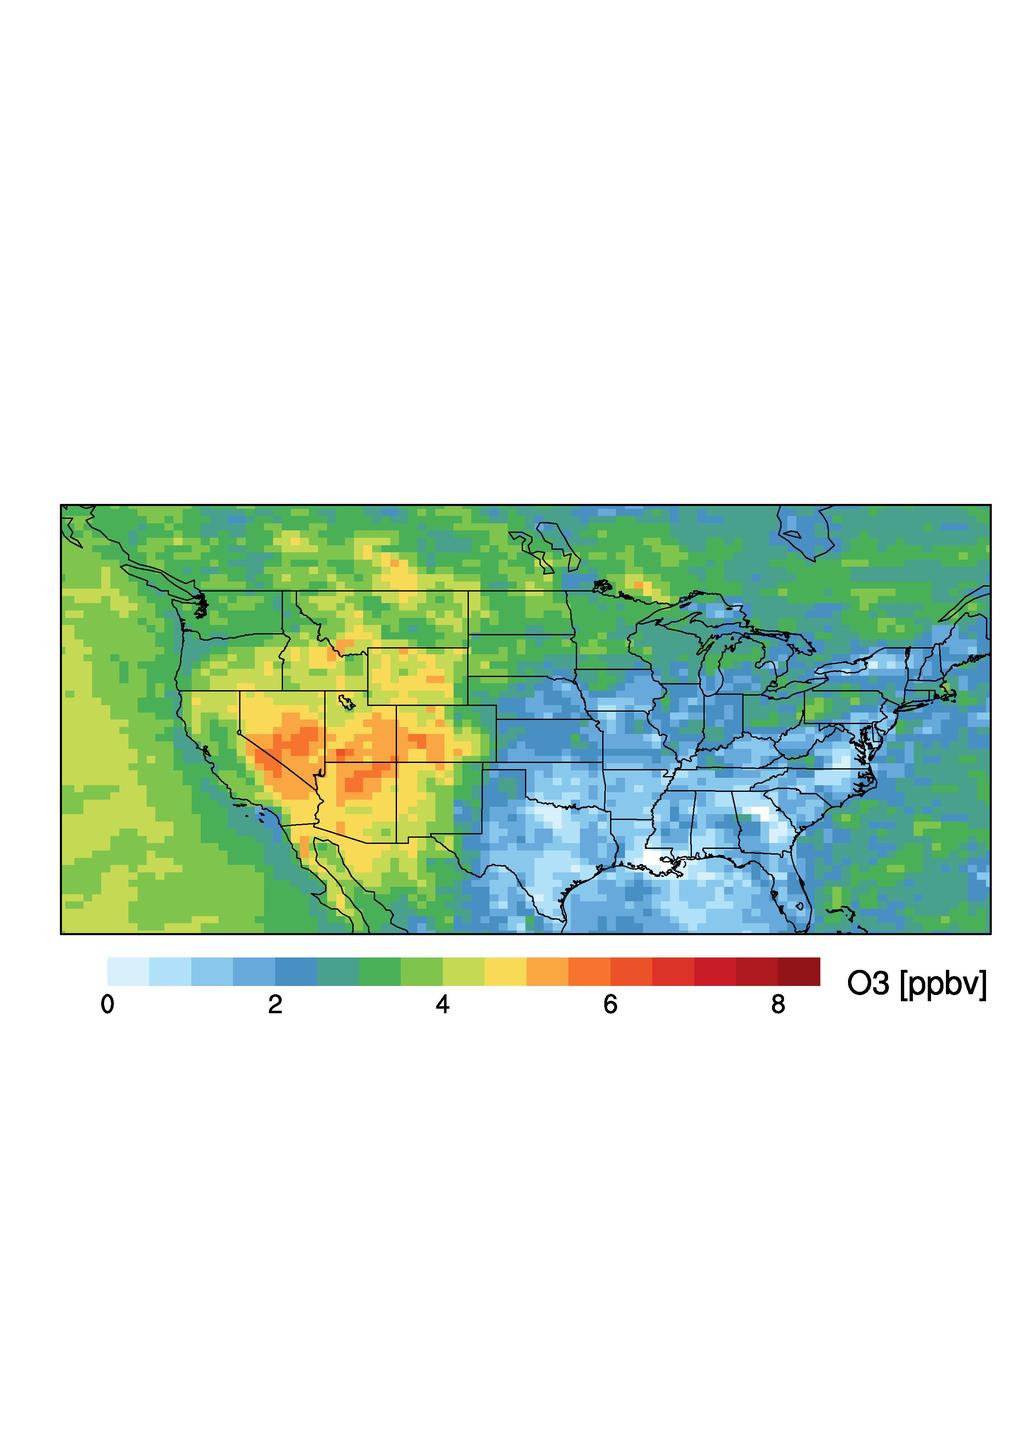 Estimates of Asian and stratospheric influence on WUS surface ozone in spring TOOL: GFDL AM3 chemistry-climate model [Donner et al., J. Clim.